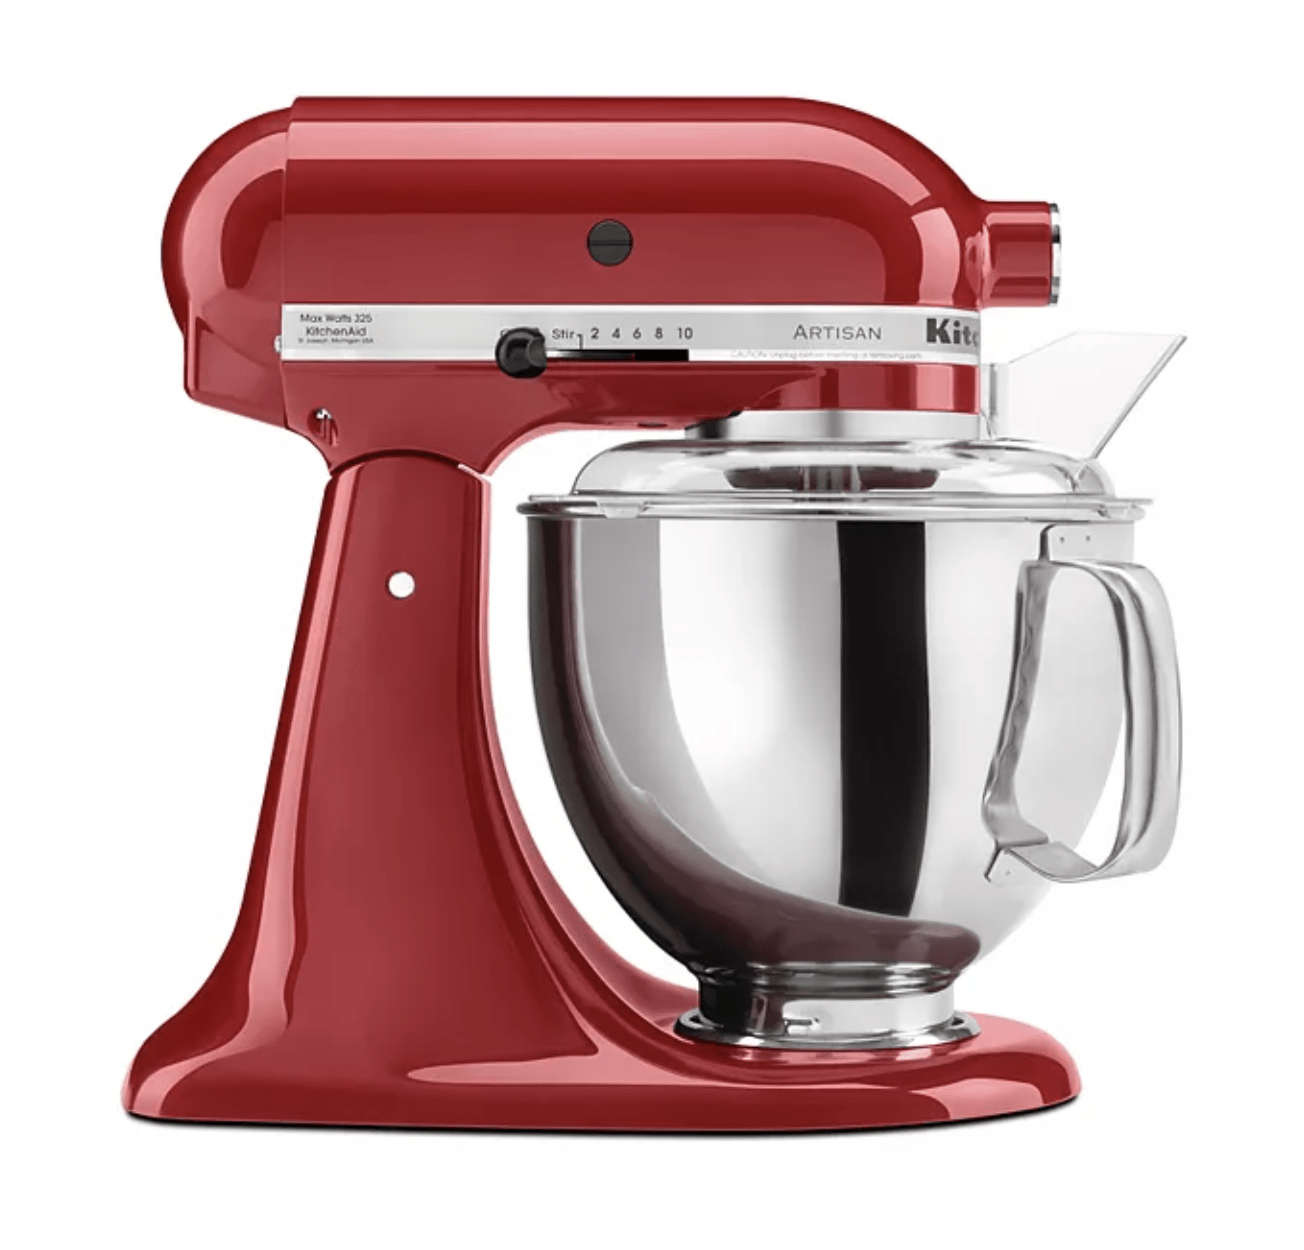 Best Black Friday deals on KitchenAid mixers and their many ...